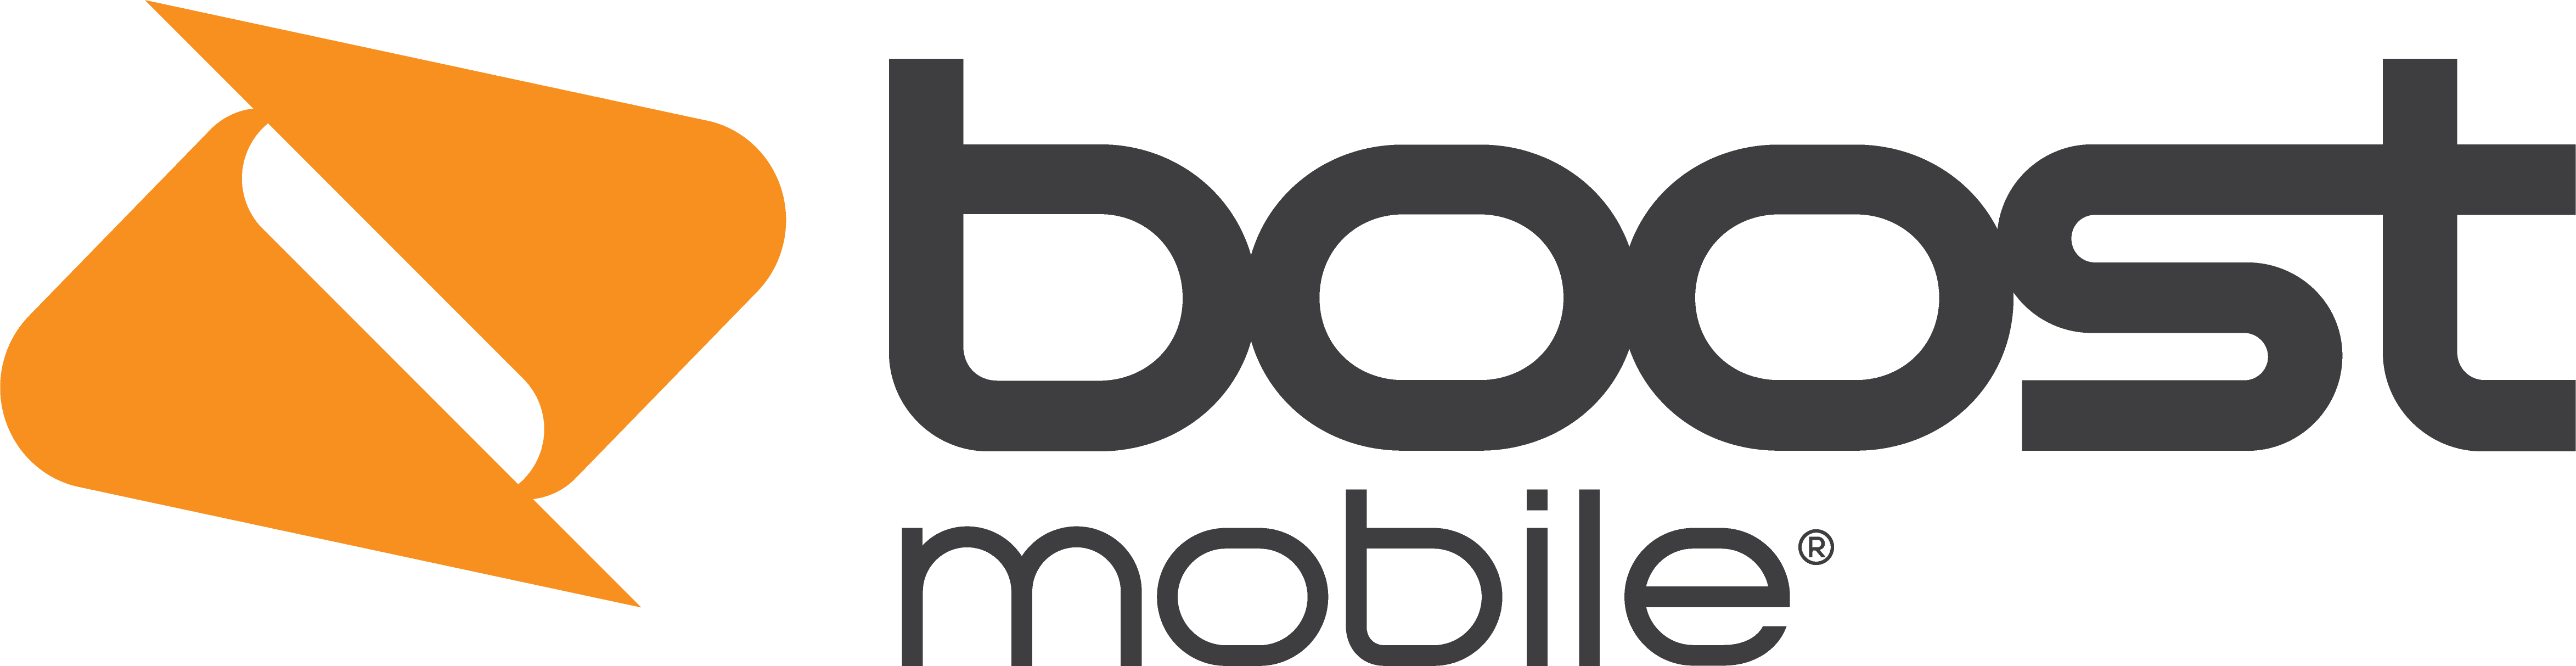 boost mobile: get 3 months free when you buy 3 months unlimited data, talk & text - $90